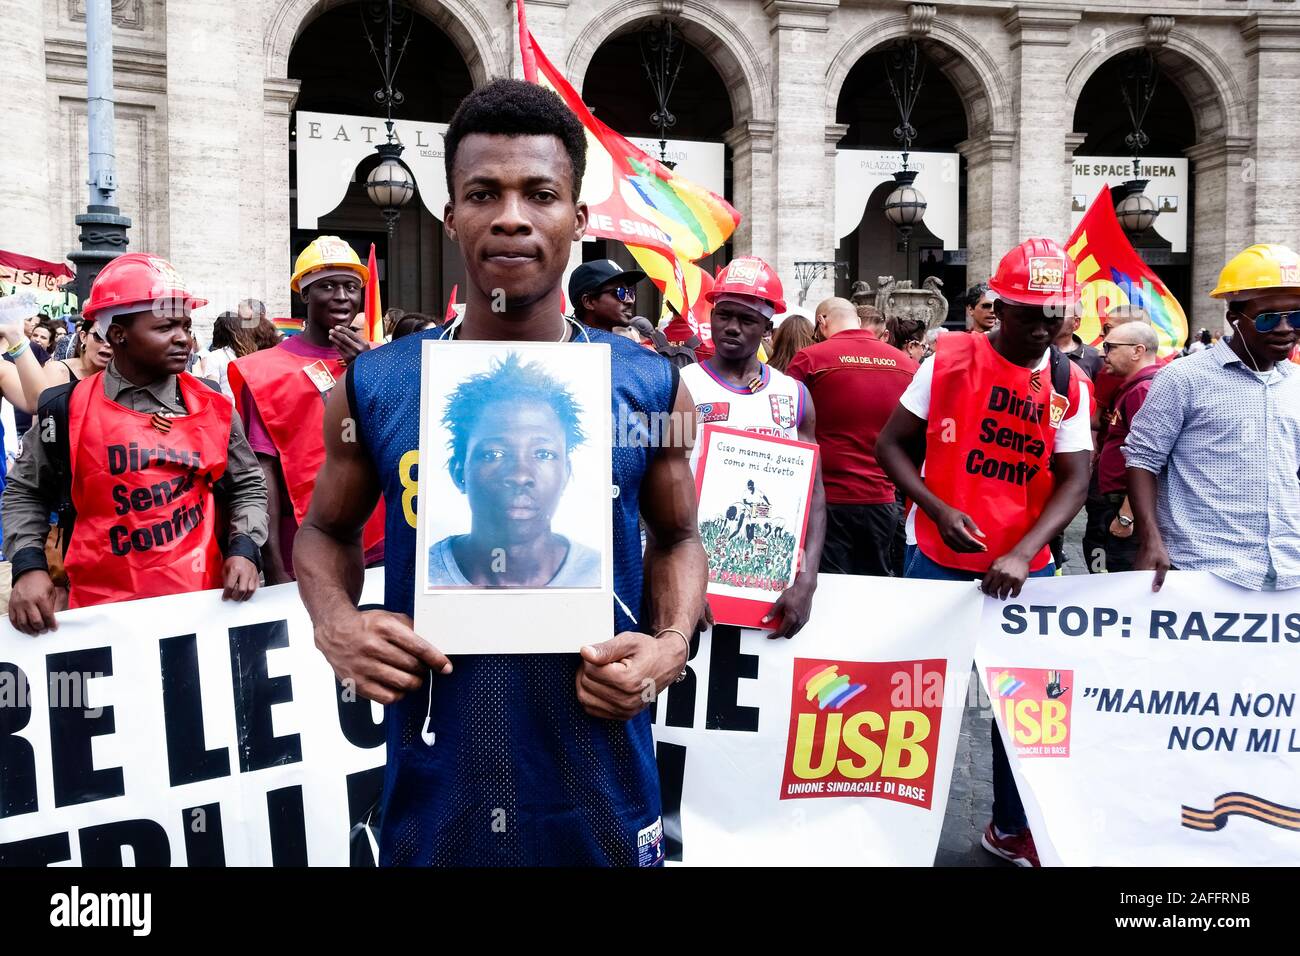 Rome, 9th June 2018. Demonstrators against racism and in favor of human rights without borders. In memory of Soumaila Sacko, citizen of Mali, was a worker and an activist trade unionist for agricultural workers' rights. The 2nd June 2018 was shot to death while searching for pieces of sheet metal in the former 'Tranquilla' furnace of San Calogero in the province of Reggio Calabria. Soumaila lived in the tent city of San Ferdinando, in the plain of Gioia Tauro in Calabria, a shanty town that accommodates more than four hundred workers. Black african young men demostrating. Europe, EU. Stock Photo